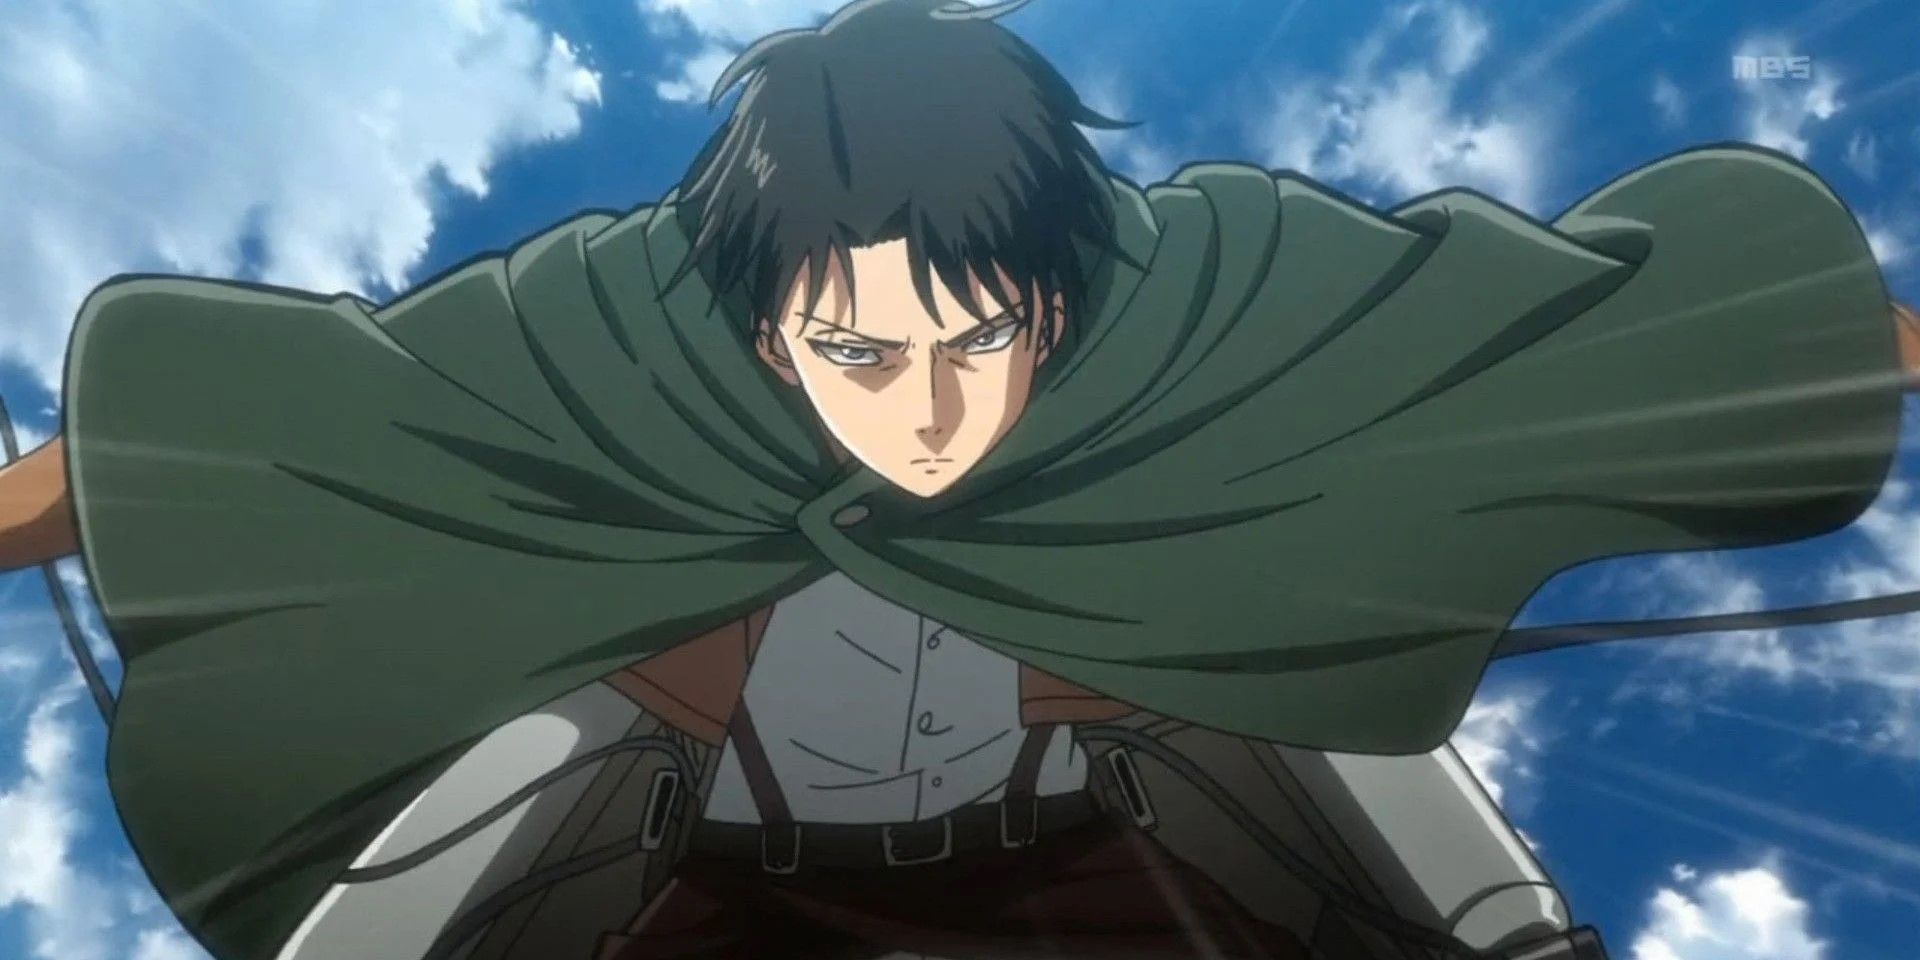 3. Levi Ackerman from Attack on Titan - wide 5